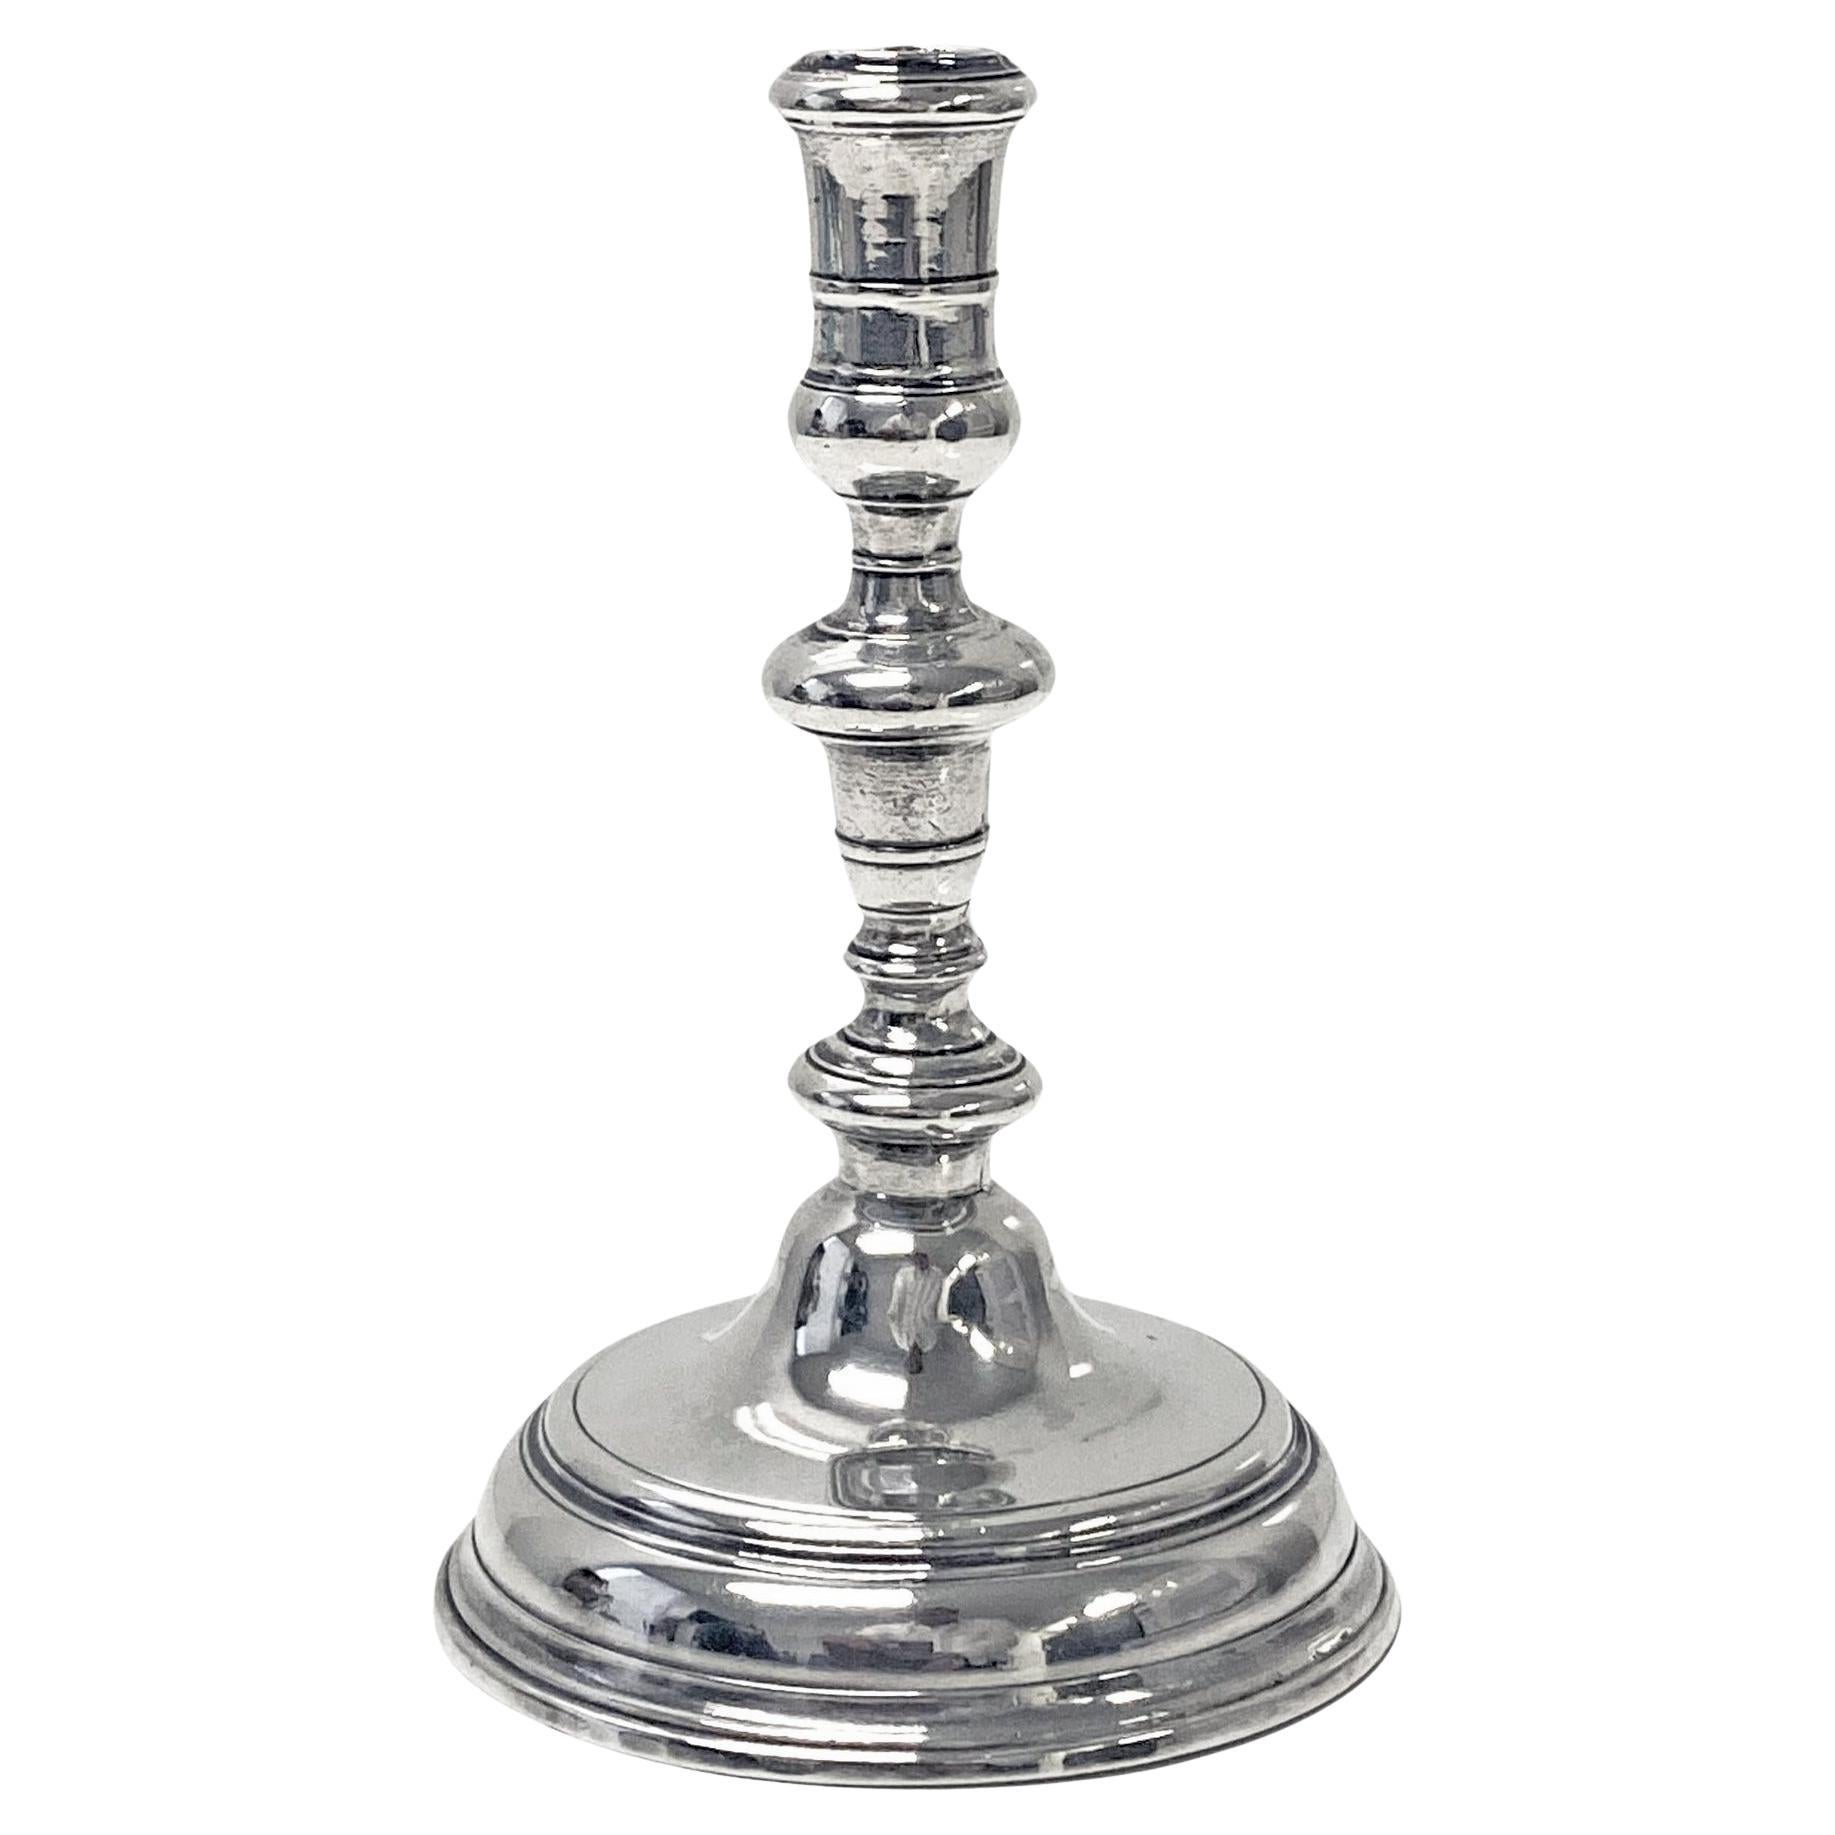 Queen Anne silver taperstick London 1704 Richard Syngin (Syng). 